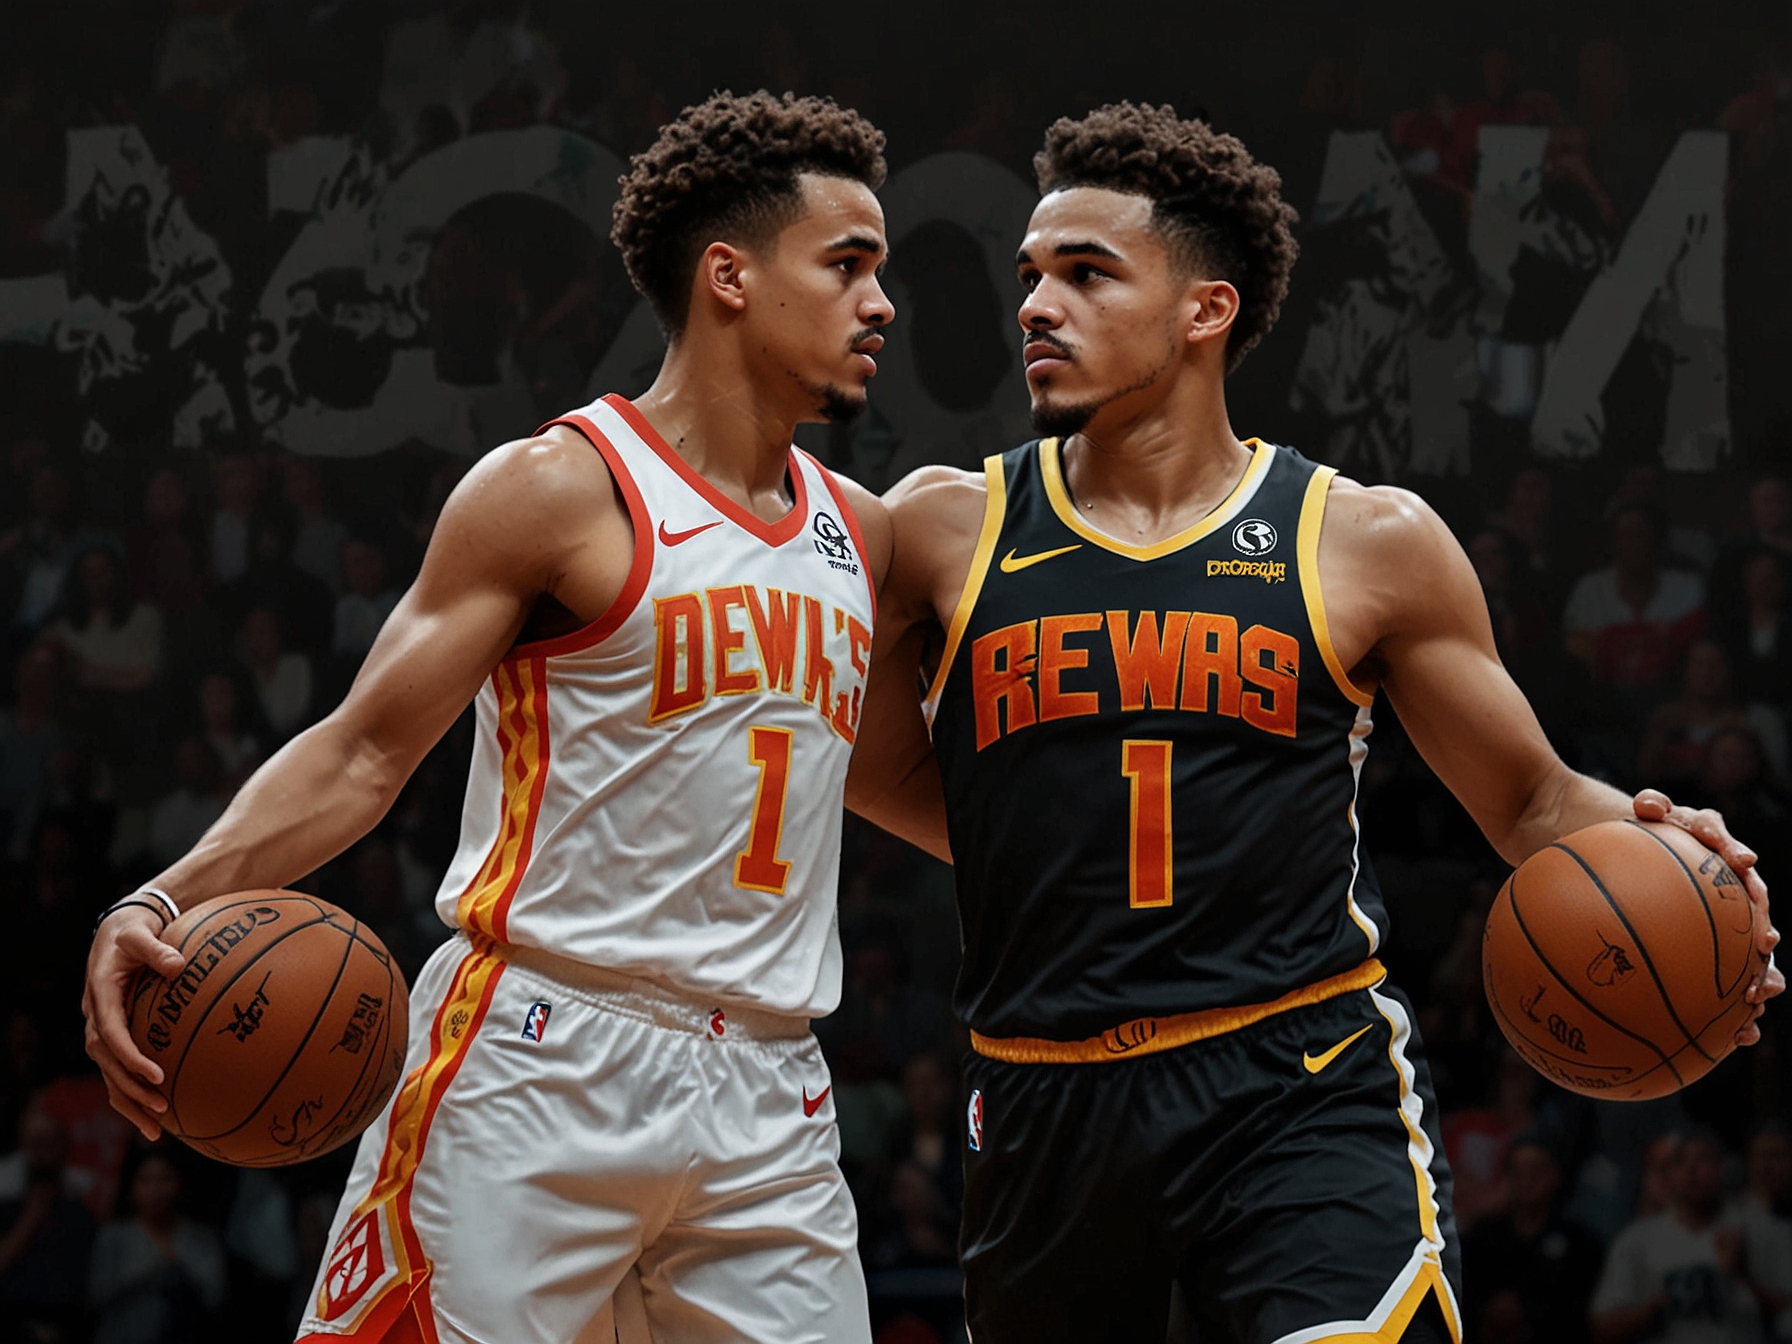 Visual representation of Trae Young’s playmaking and sharpshooting abilities versus Dejounte Murray’s defensive prowess and versatility, emphasizing the Hawks' trade dilemma.